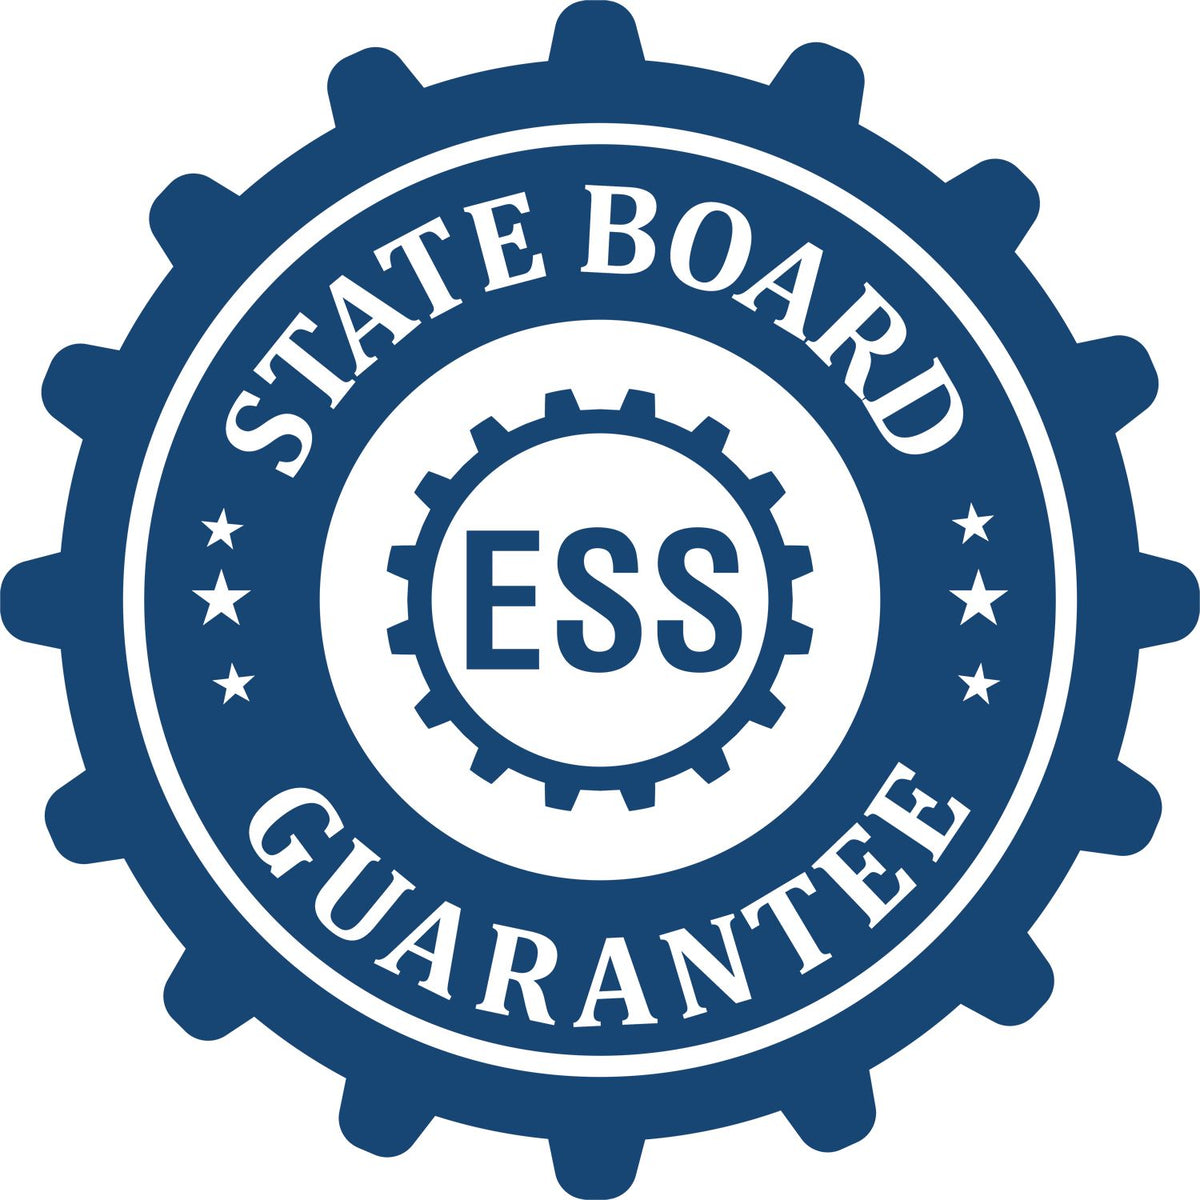 An emblem in a gear shape illustrating a state board guarantee for the Wooden Handle Indiana Rectangular Notary Public Stamp product.